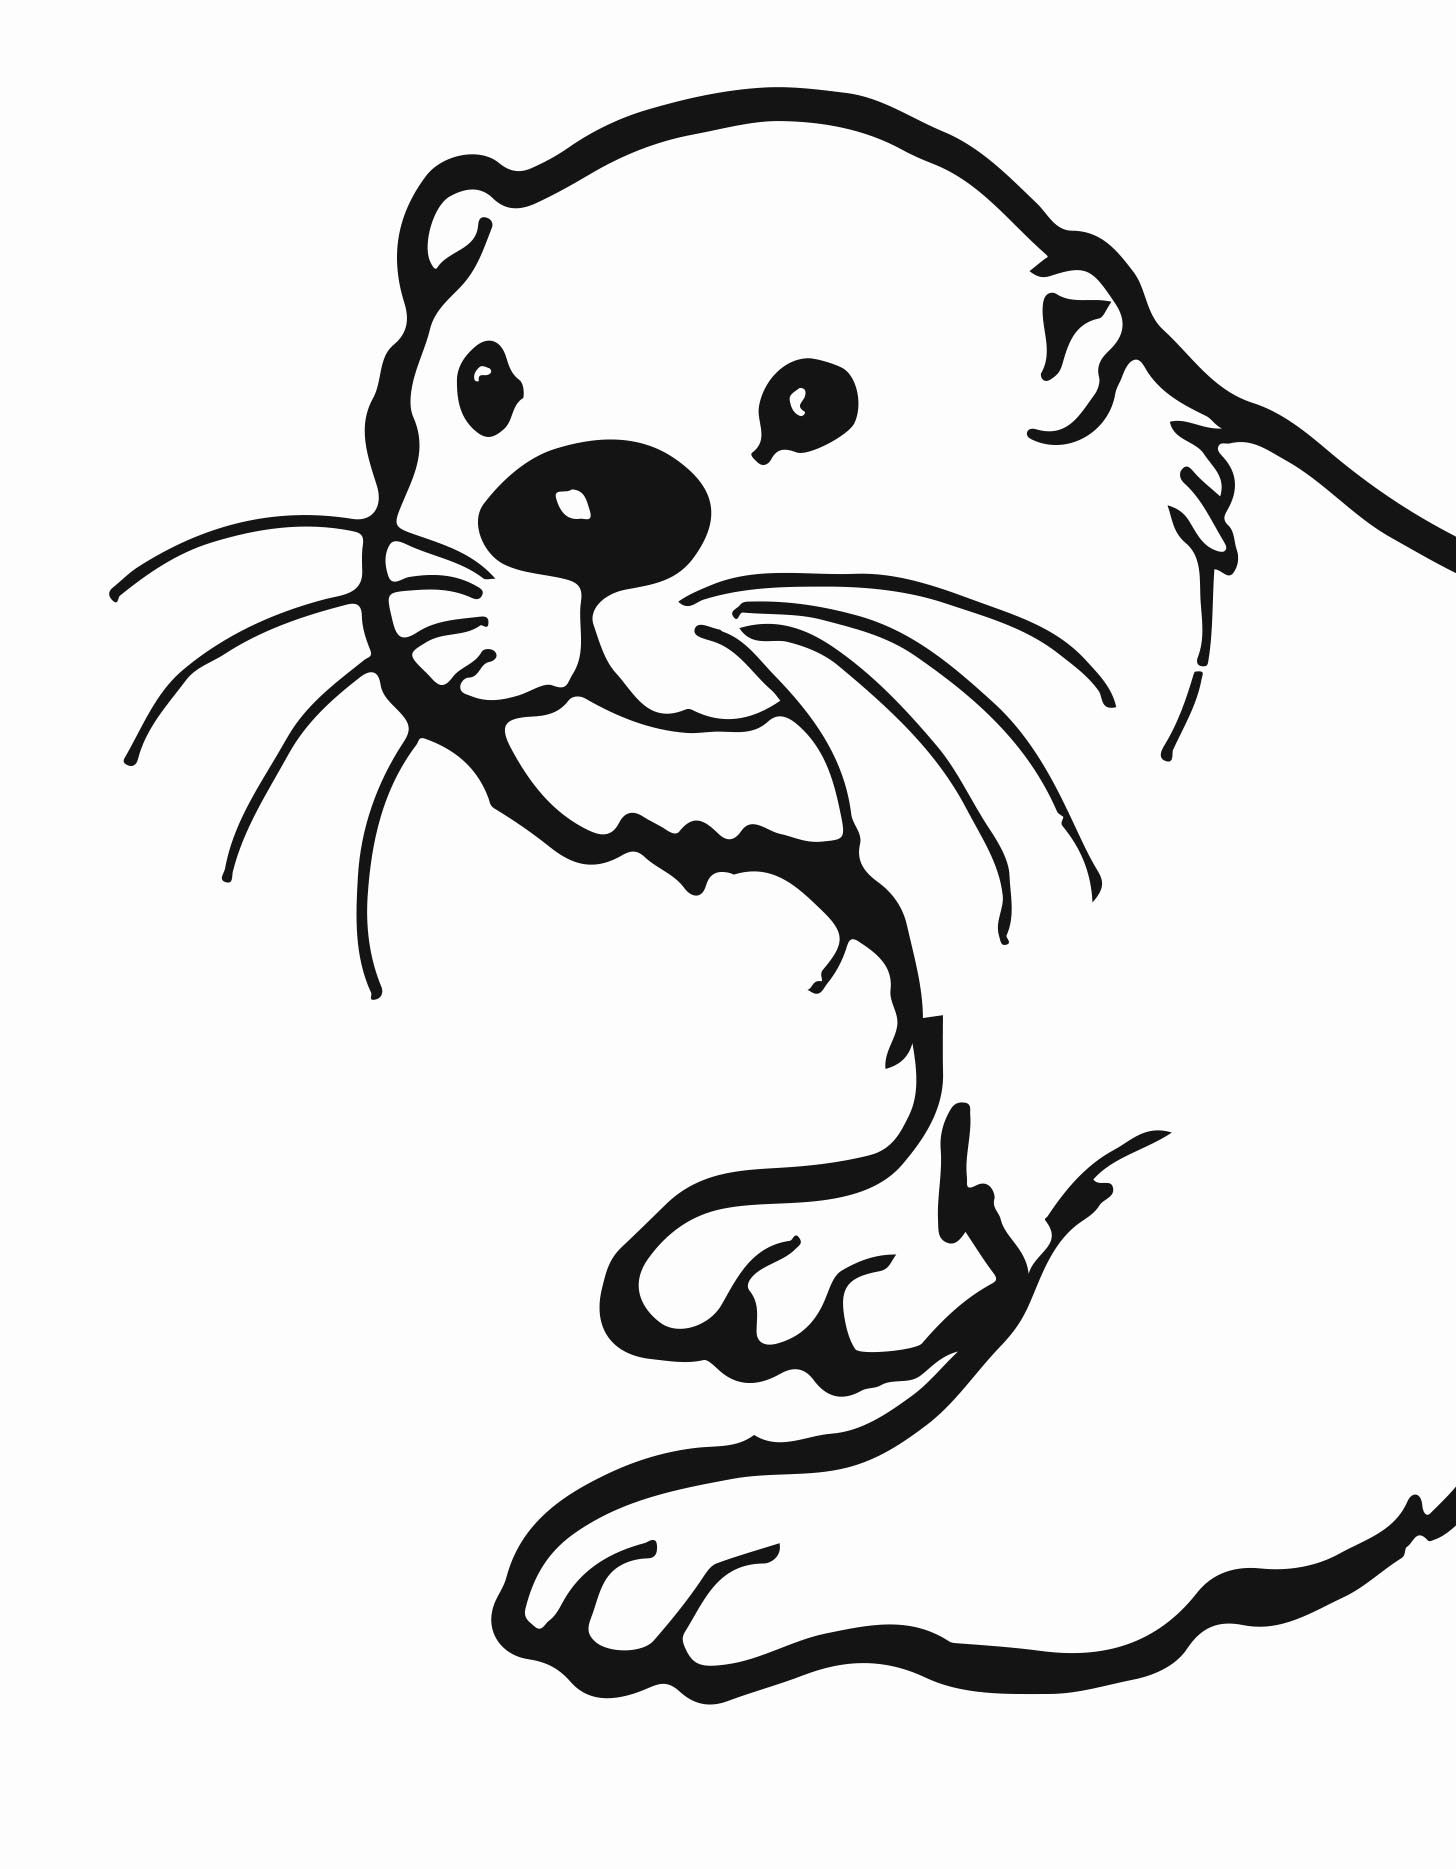 Otter clipart free